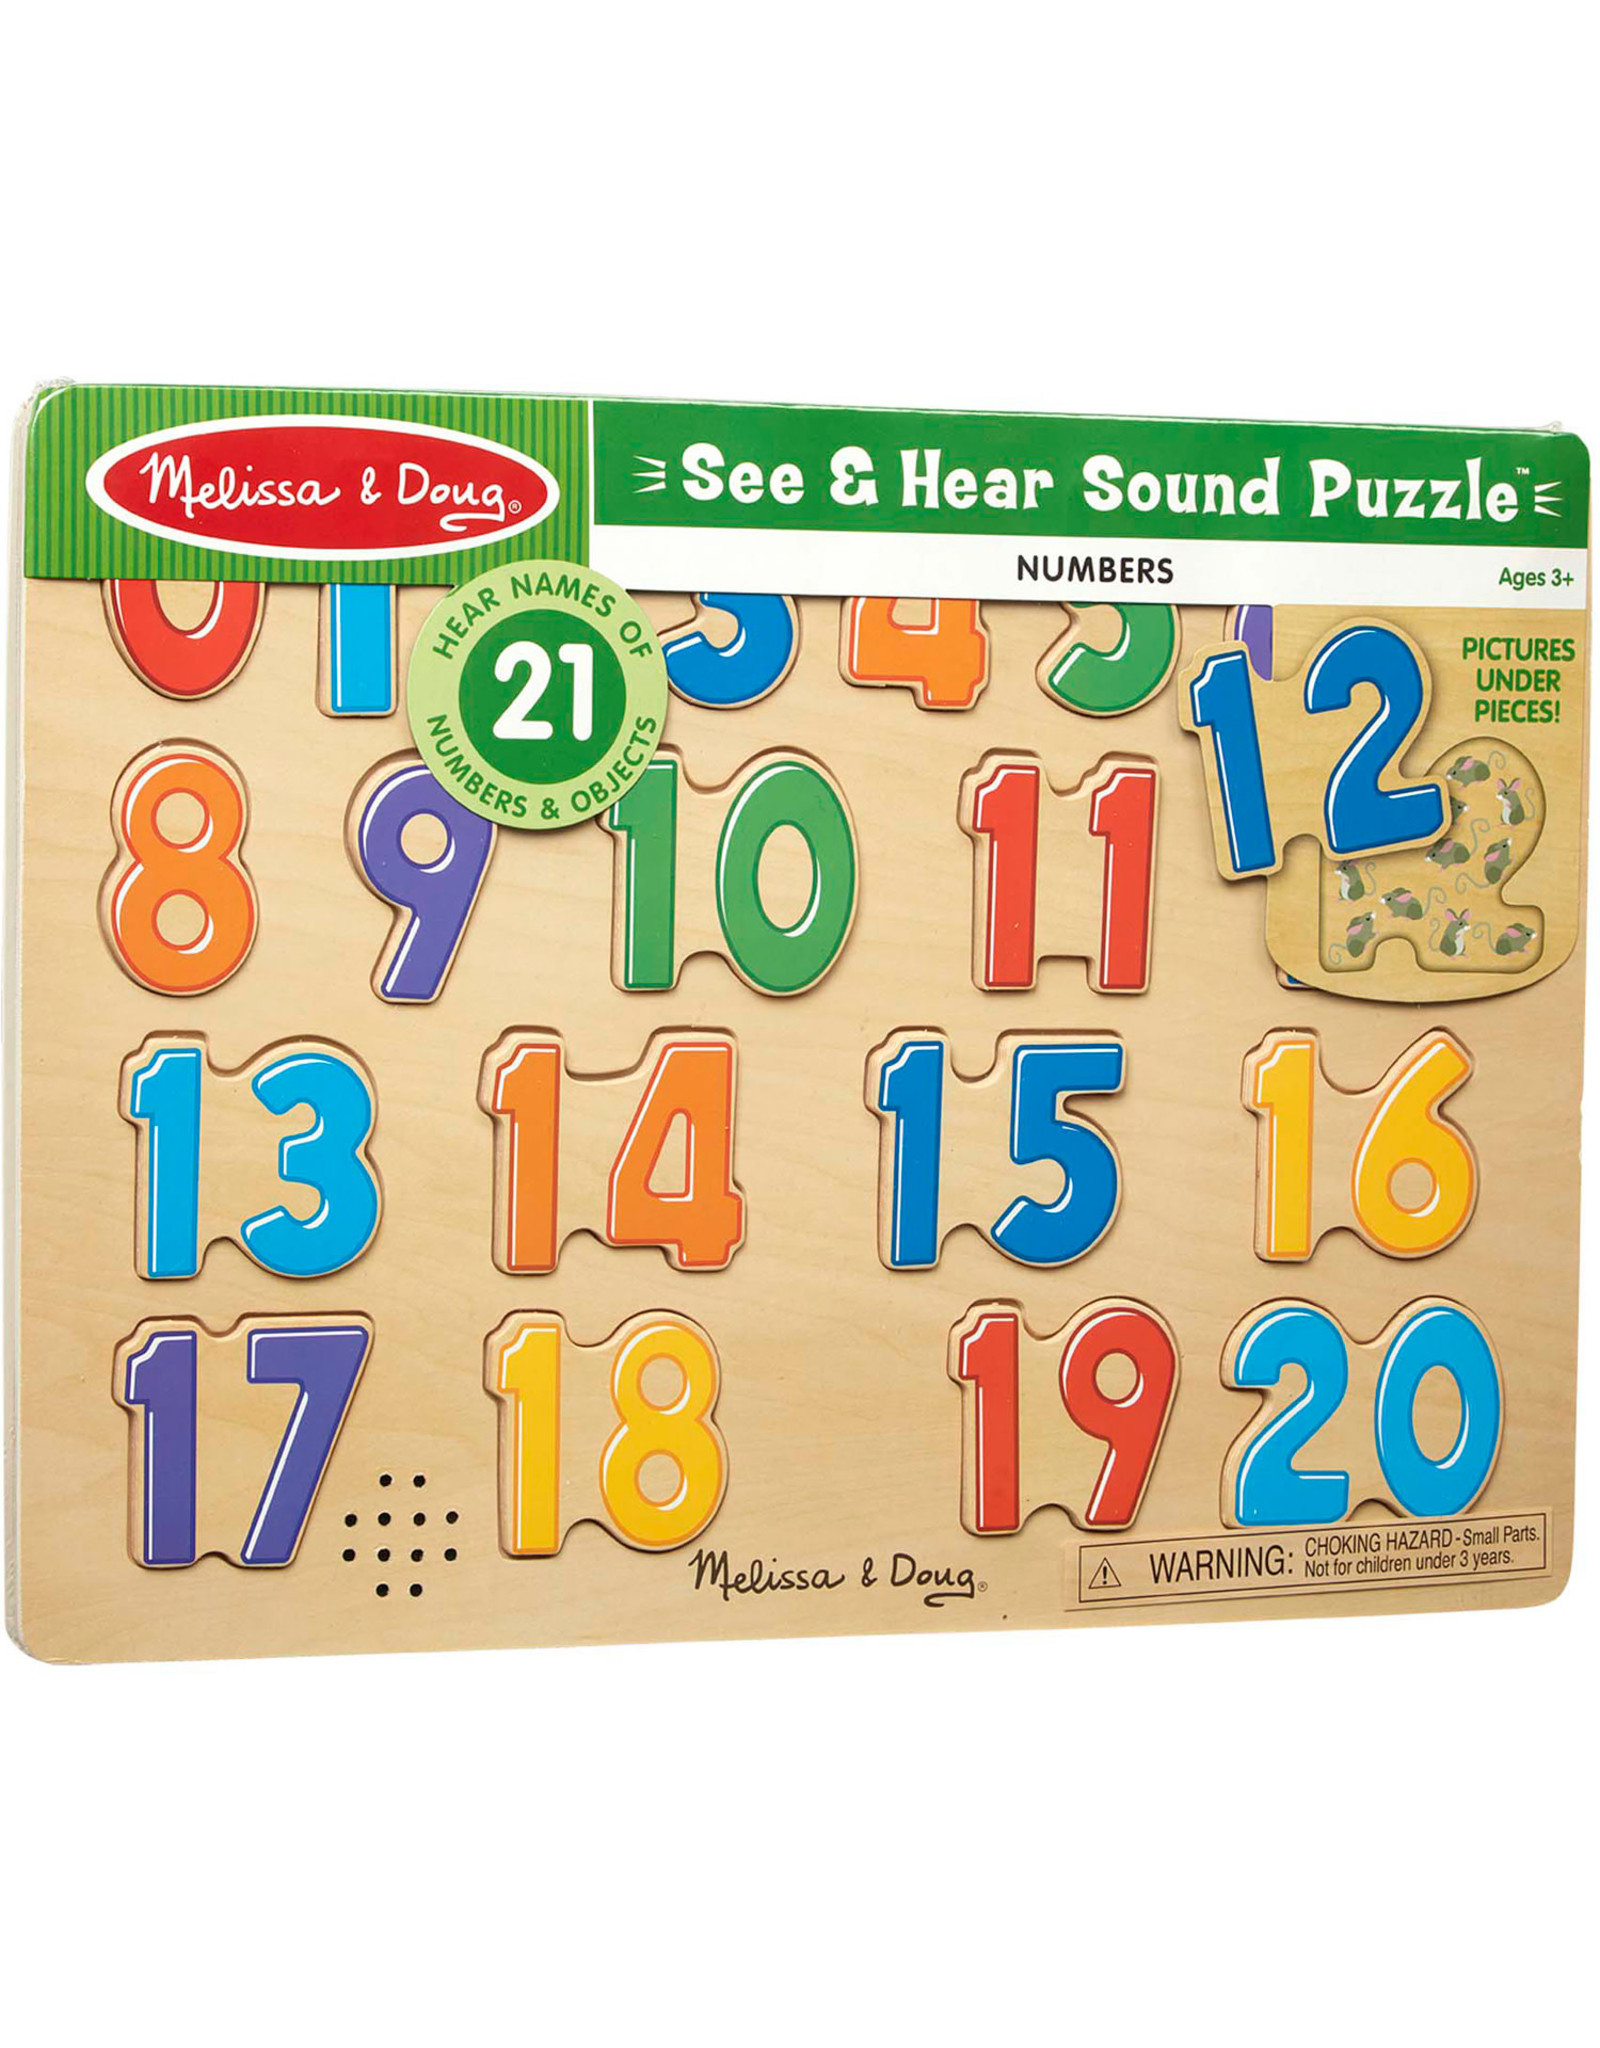 Melissa & Doug See & Hear sound puzzle NUMBERS